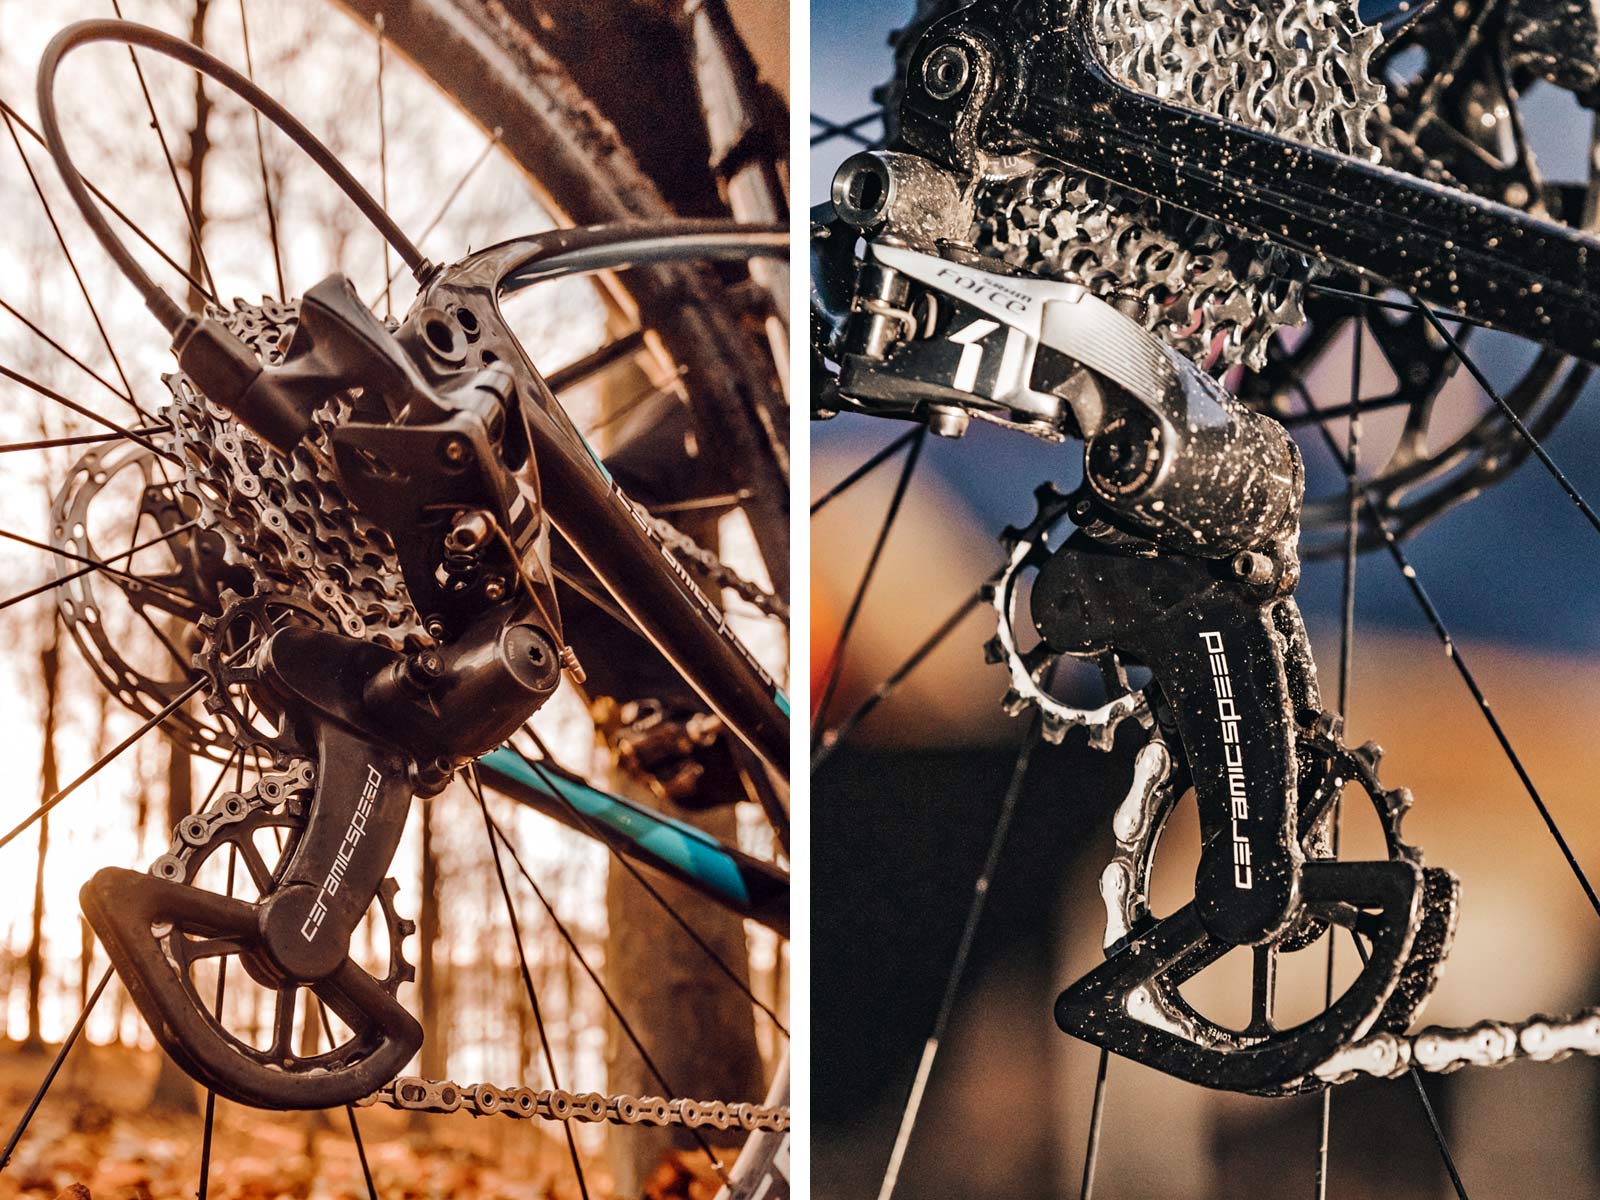 CeramicSpeed OSPW X oversized pulley wheel system CX cross cyclocross & gravel road bikes SRAM Rival Force ceramic bearings